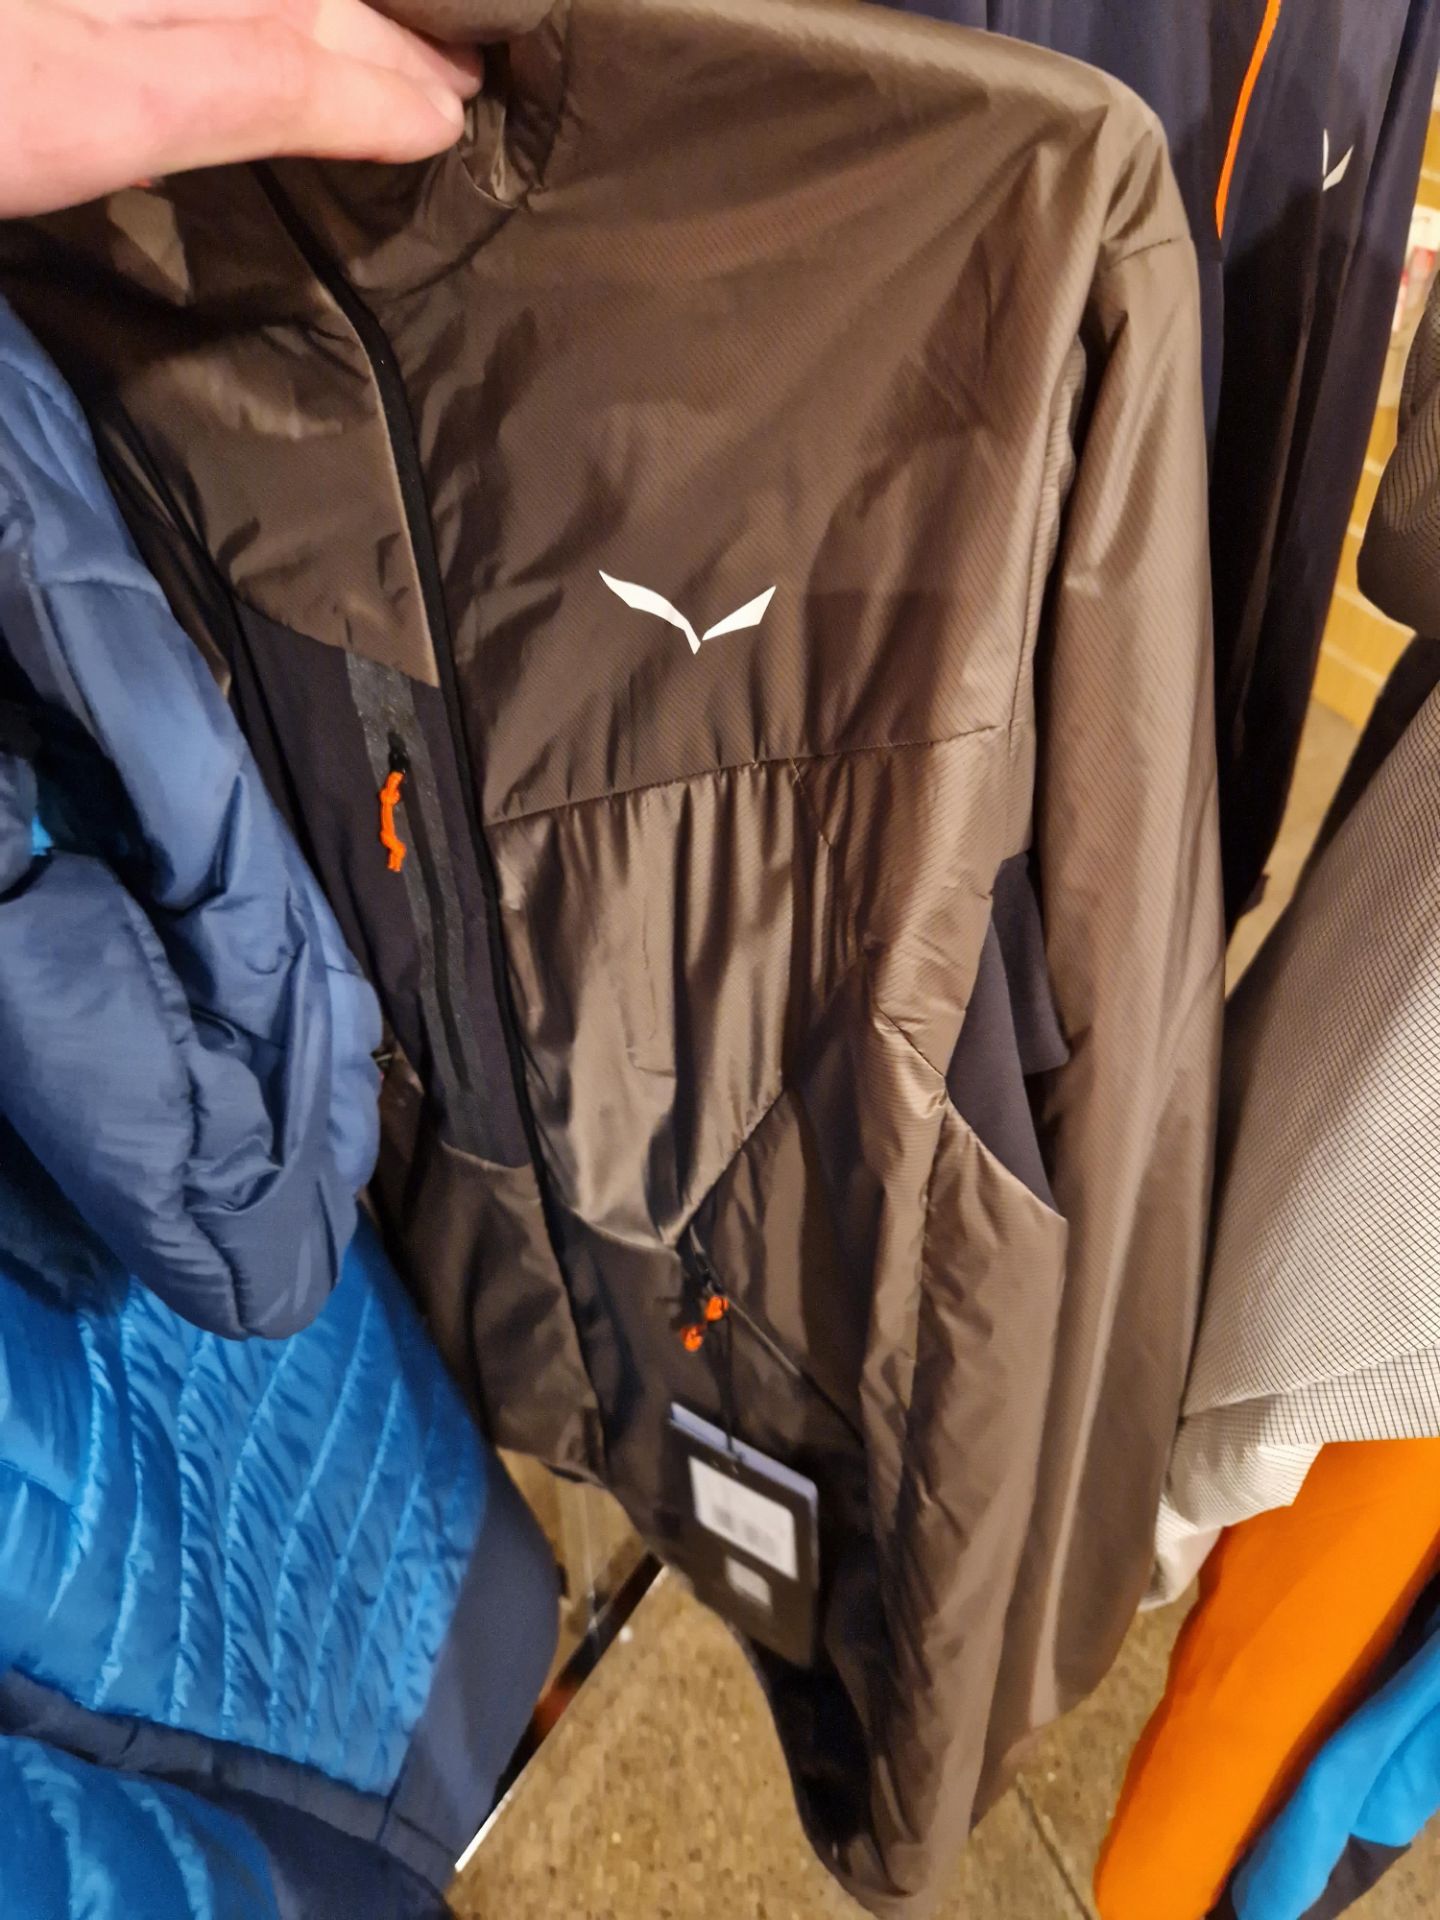 Two Salewa Ortles / Pedroc Hybrid Jackets, Colours: Classic Green / Bungee Cord, Sizes: 50/L and Two - Image 4 of 4